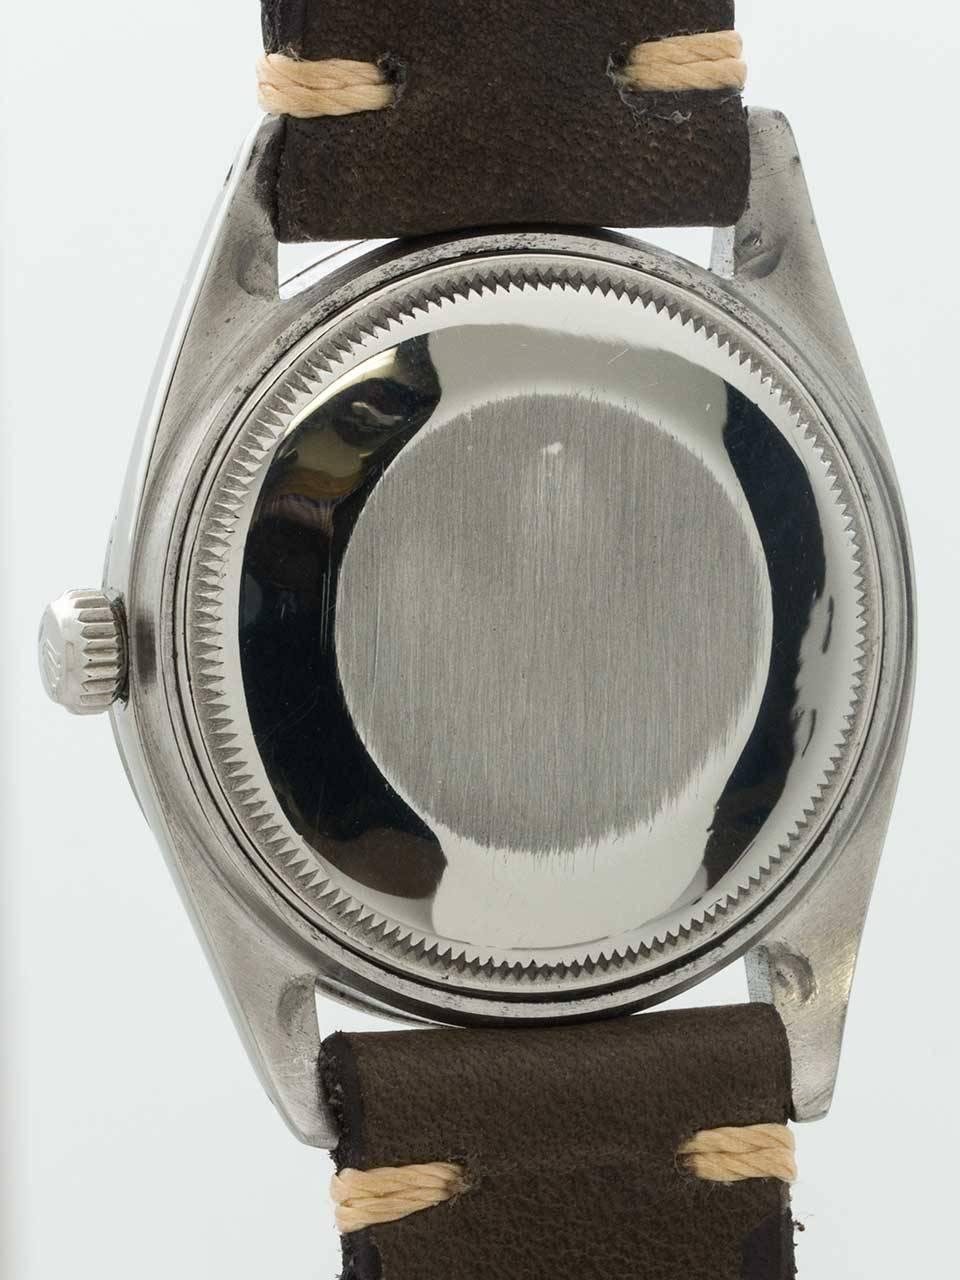 Men's Rolex Stainless Steel Oyster Perpetual Wristwatch Ref 1018 circa 1962